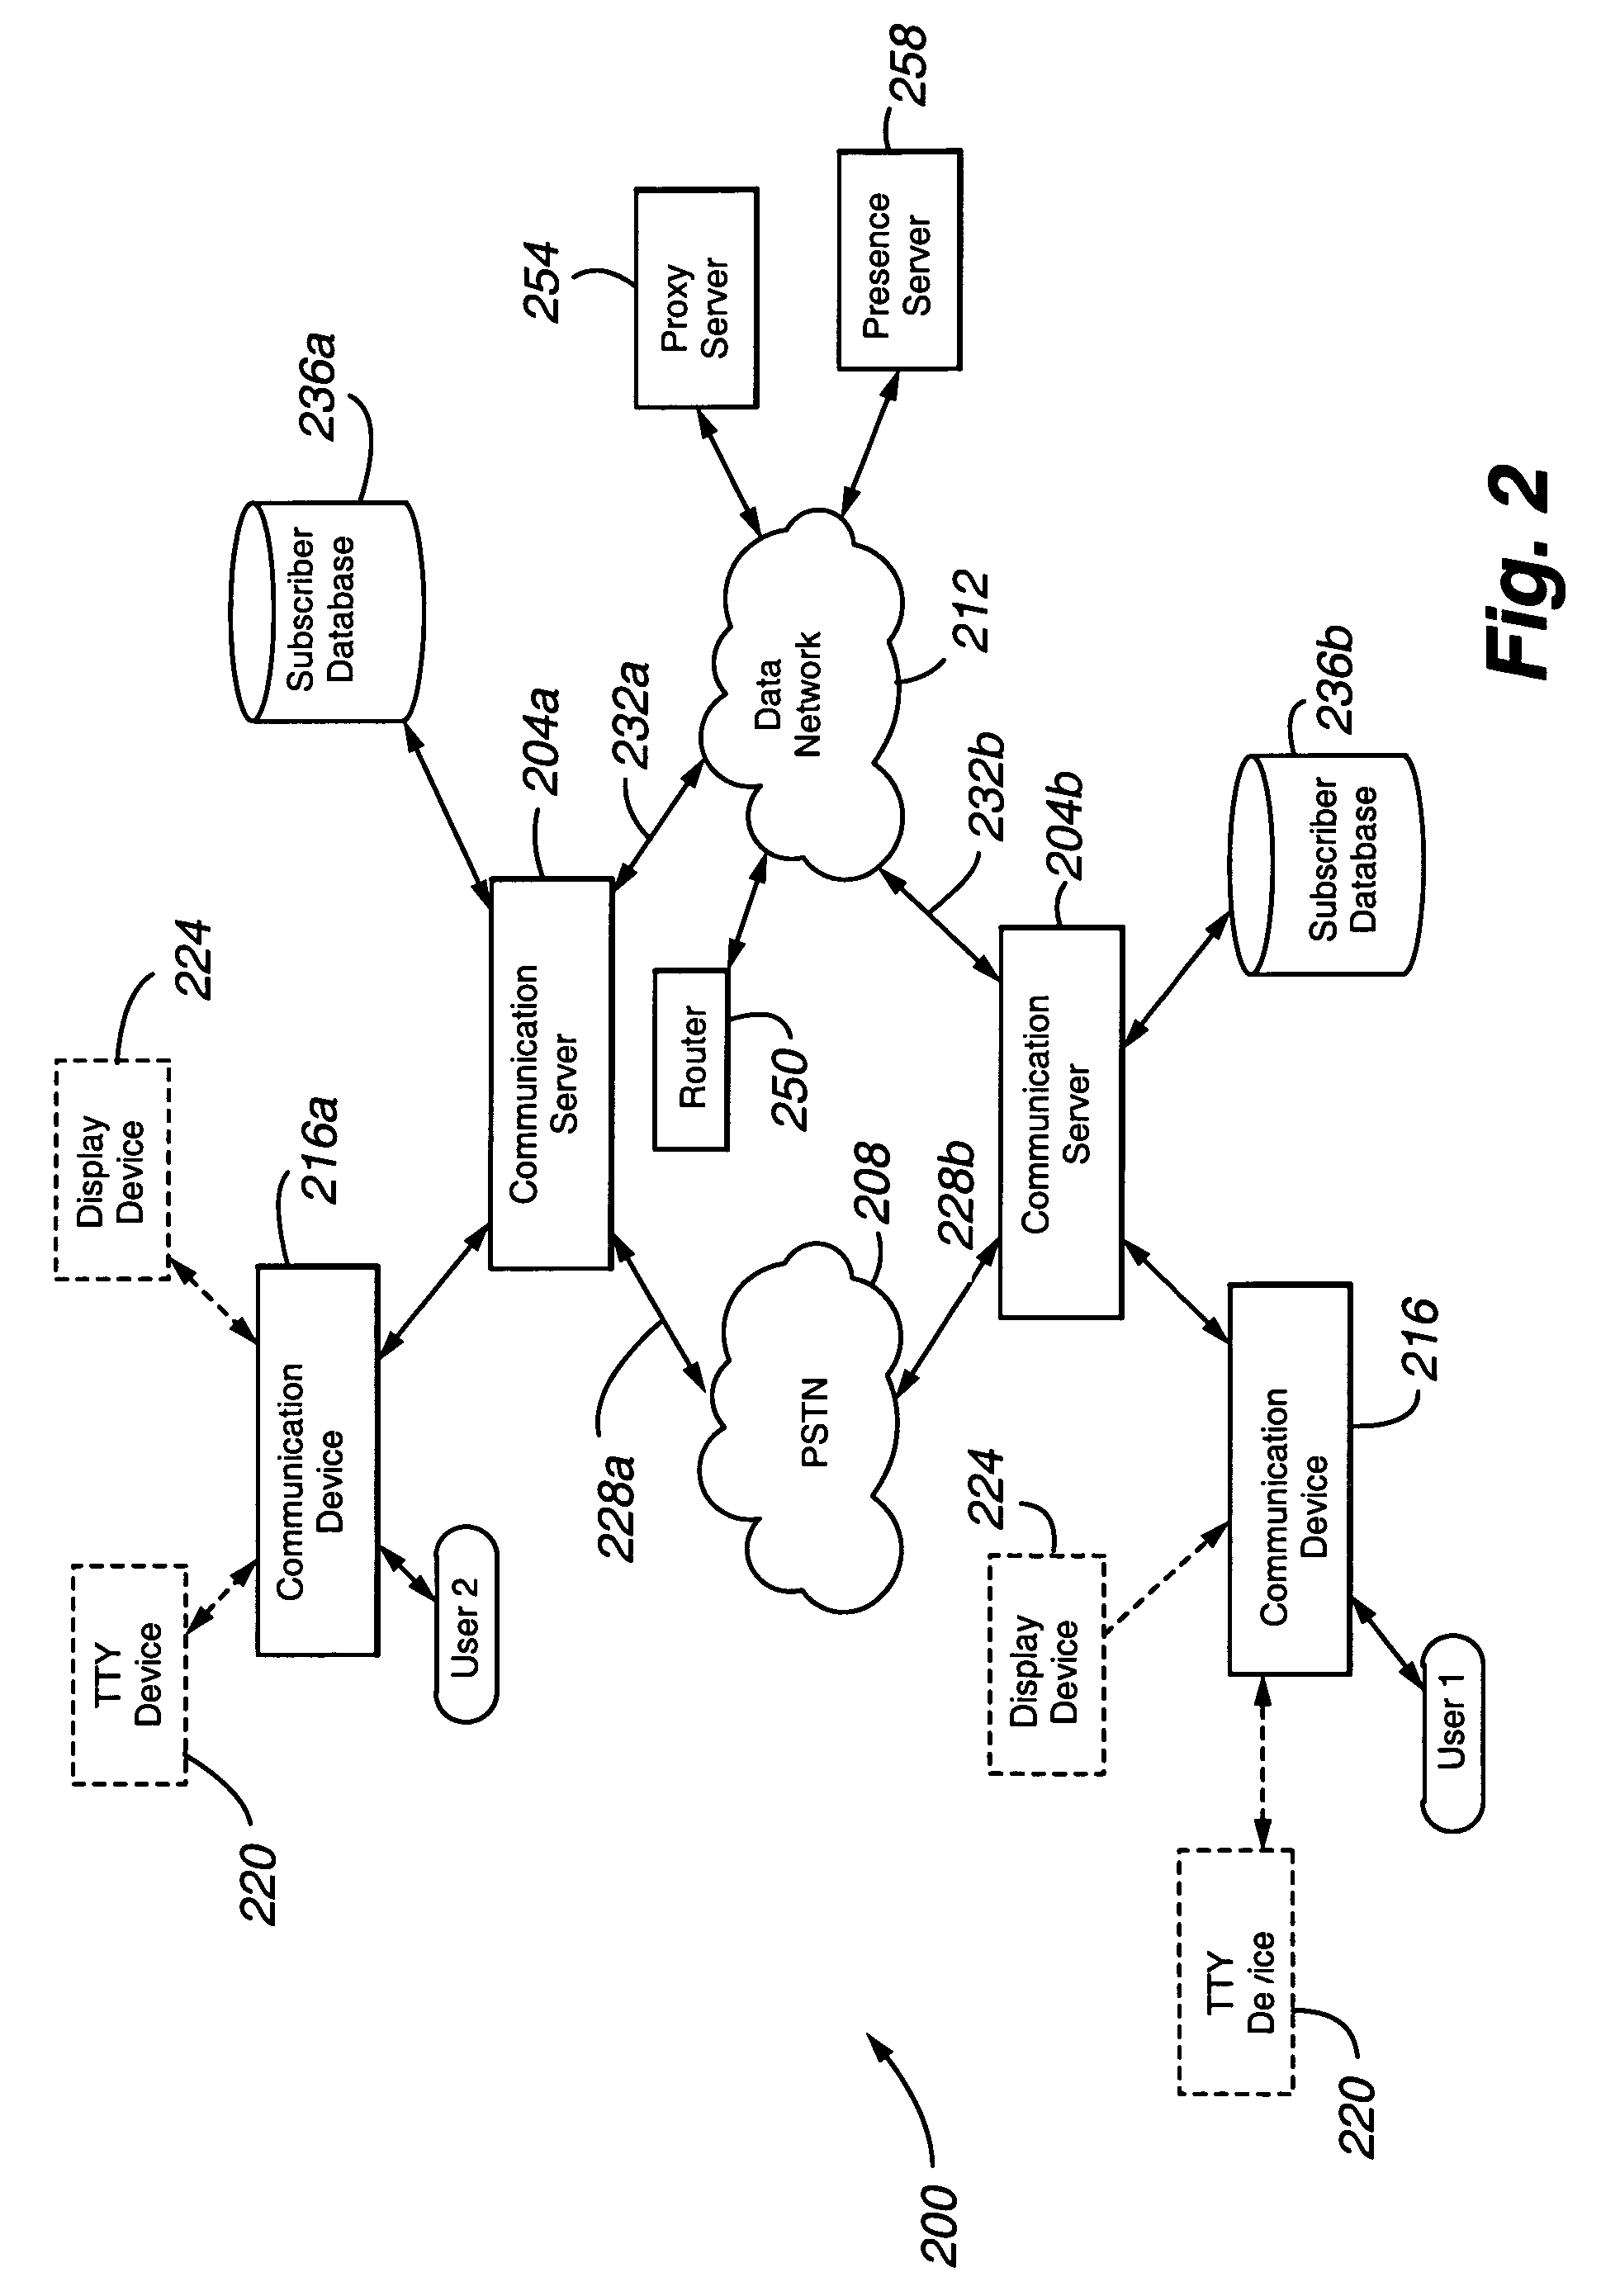 Automatic configuration of call handling based on end-user needs and characteristics